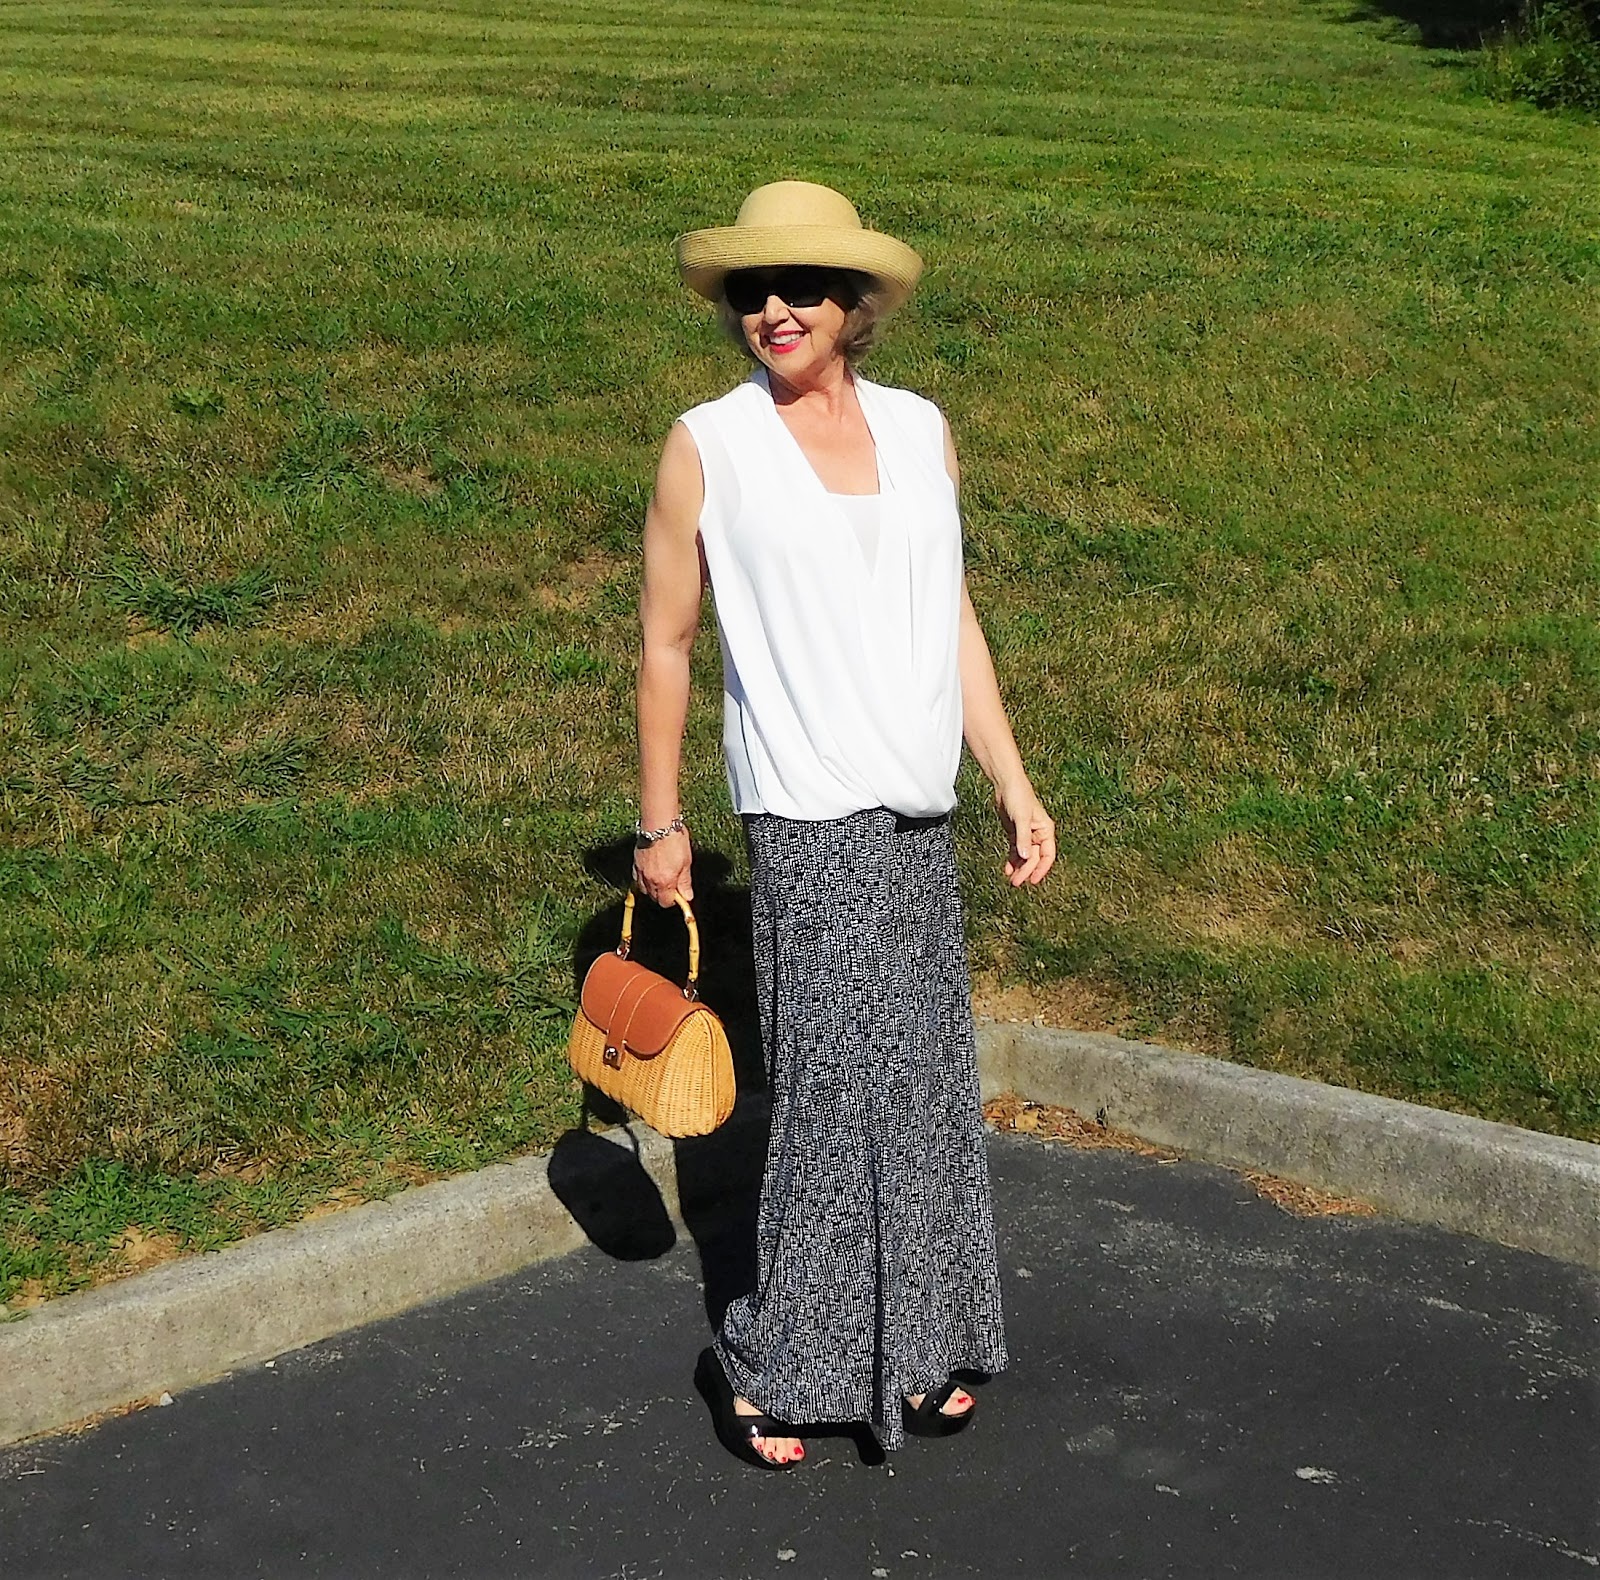 Fifty, not Frumpy: Dressing For The Heat